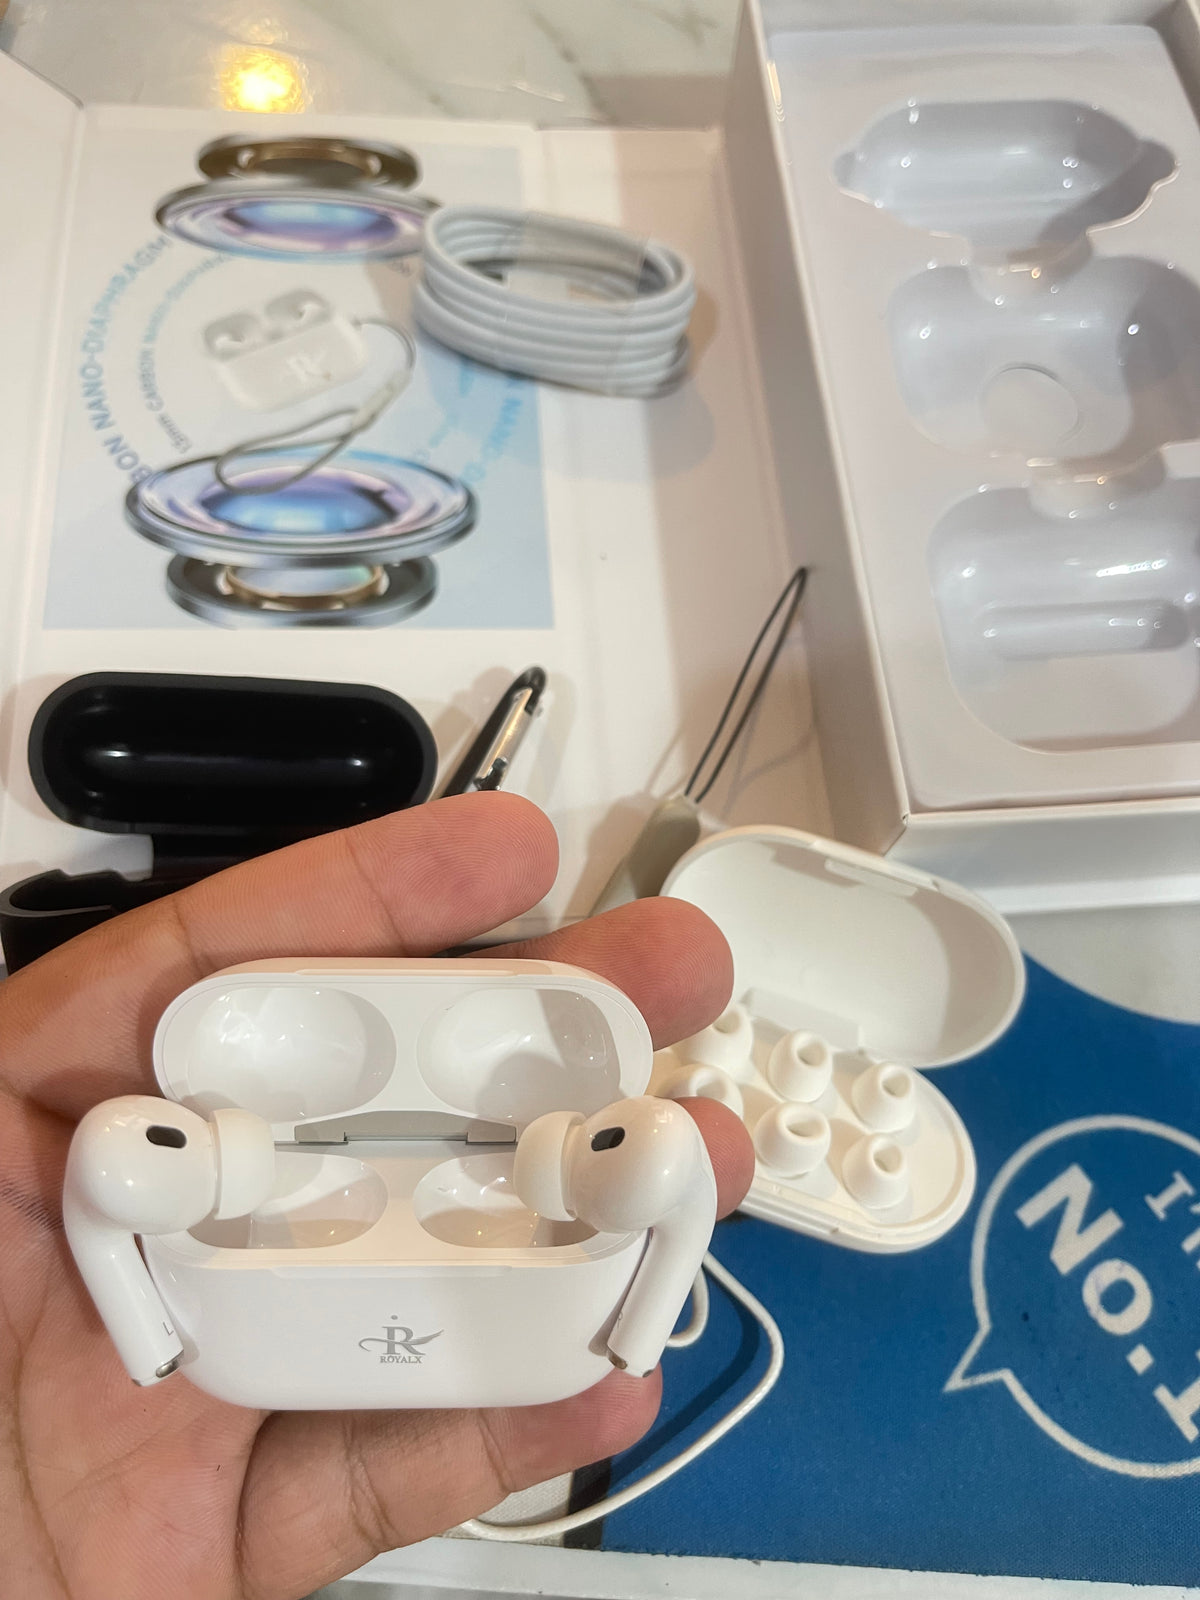 Orginal ROYAL X AIRPODS PRO & AirPods pro 2 . Very High Quality with 1 year warranty